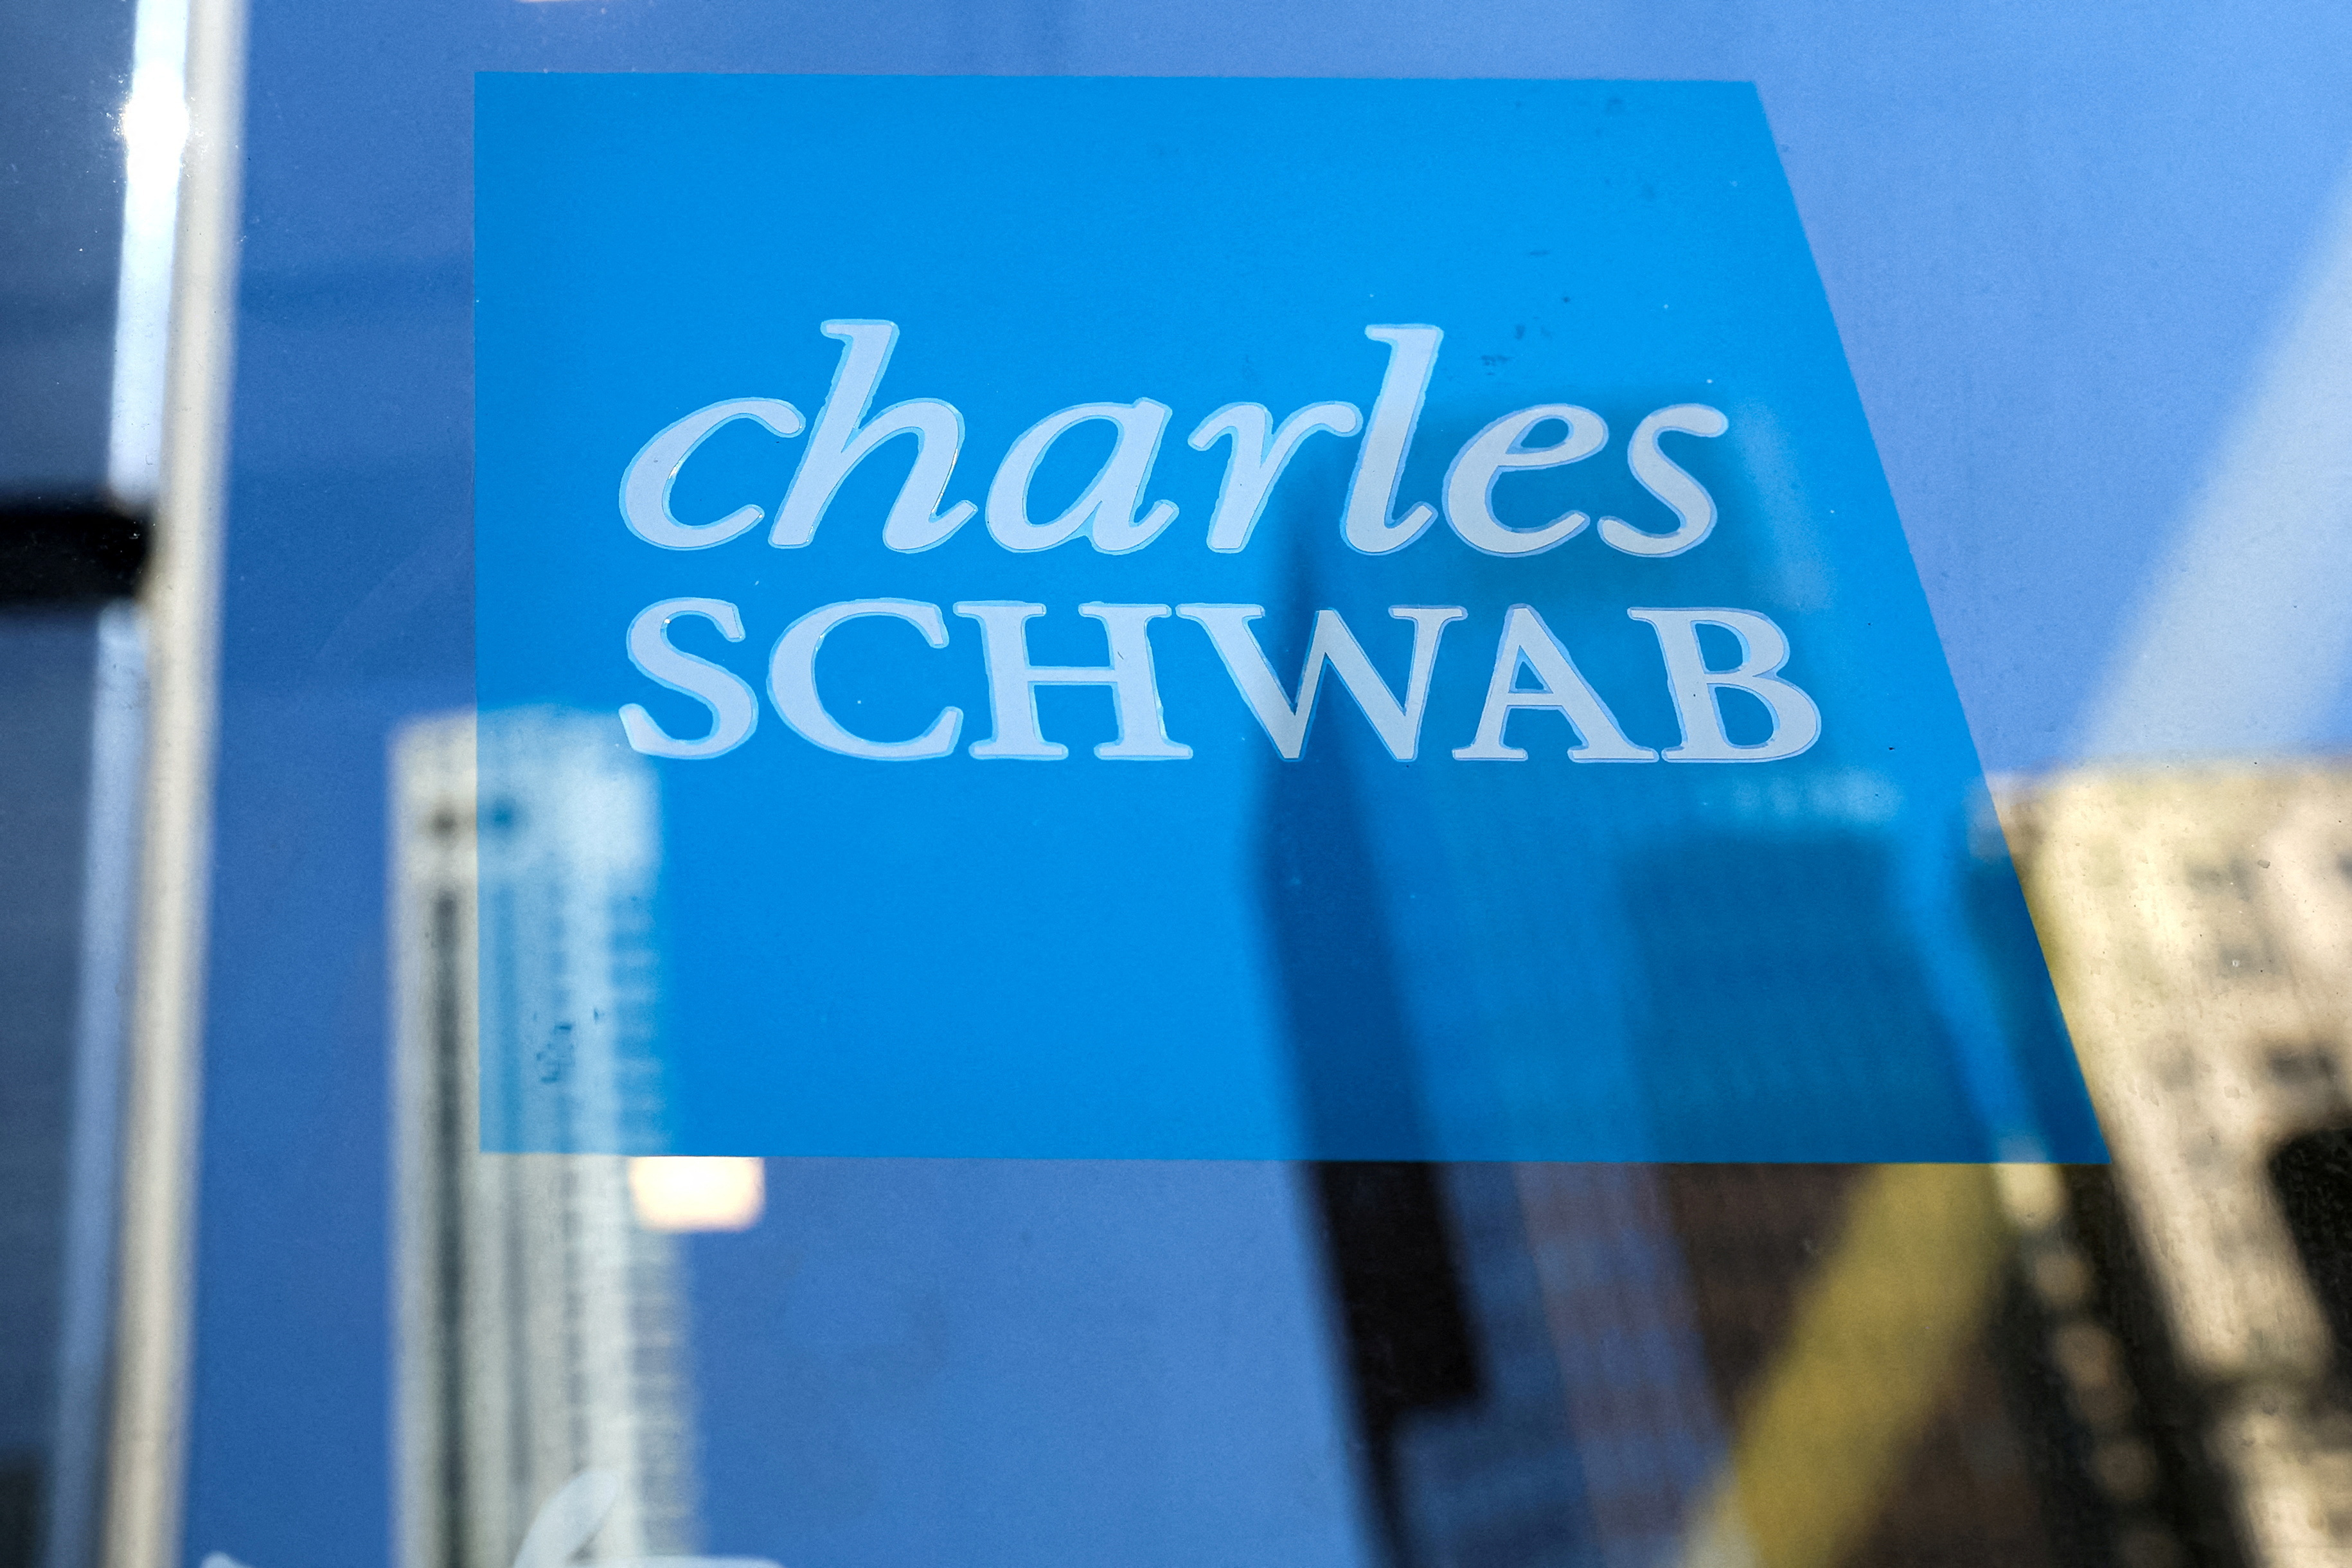 The company logo for financial broker Charles Schwab is displayed at a location in the financial district in New York